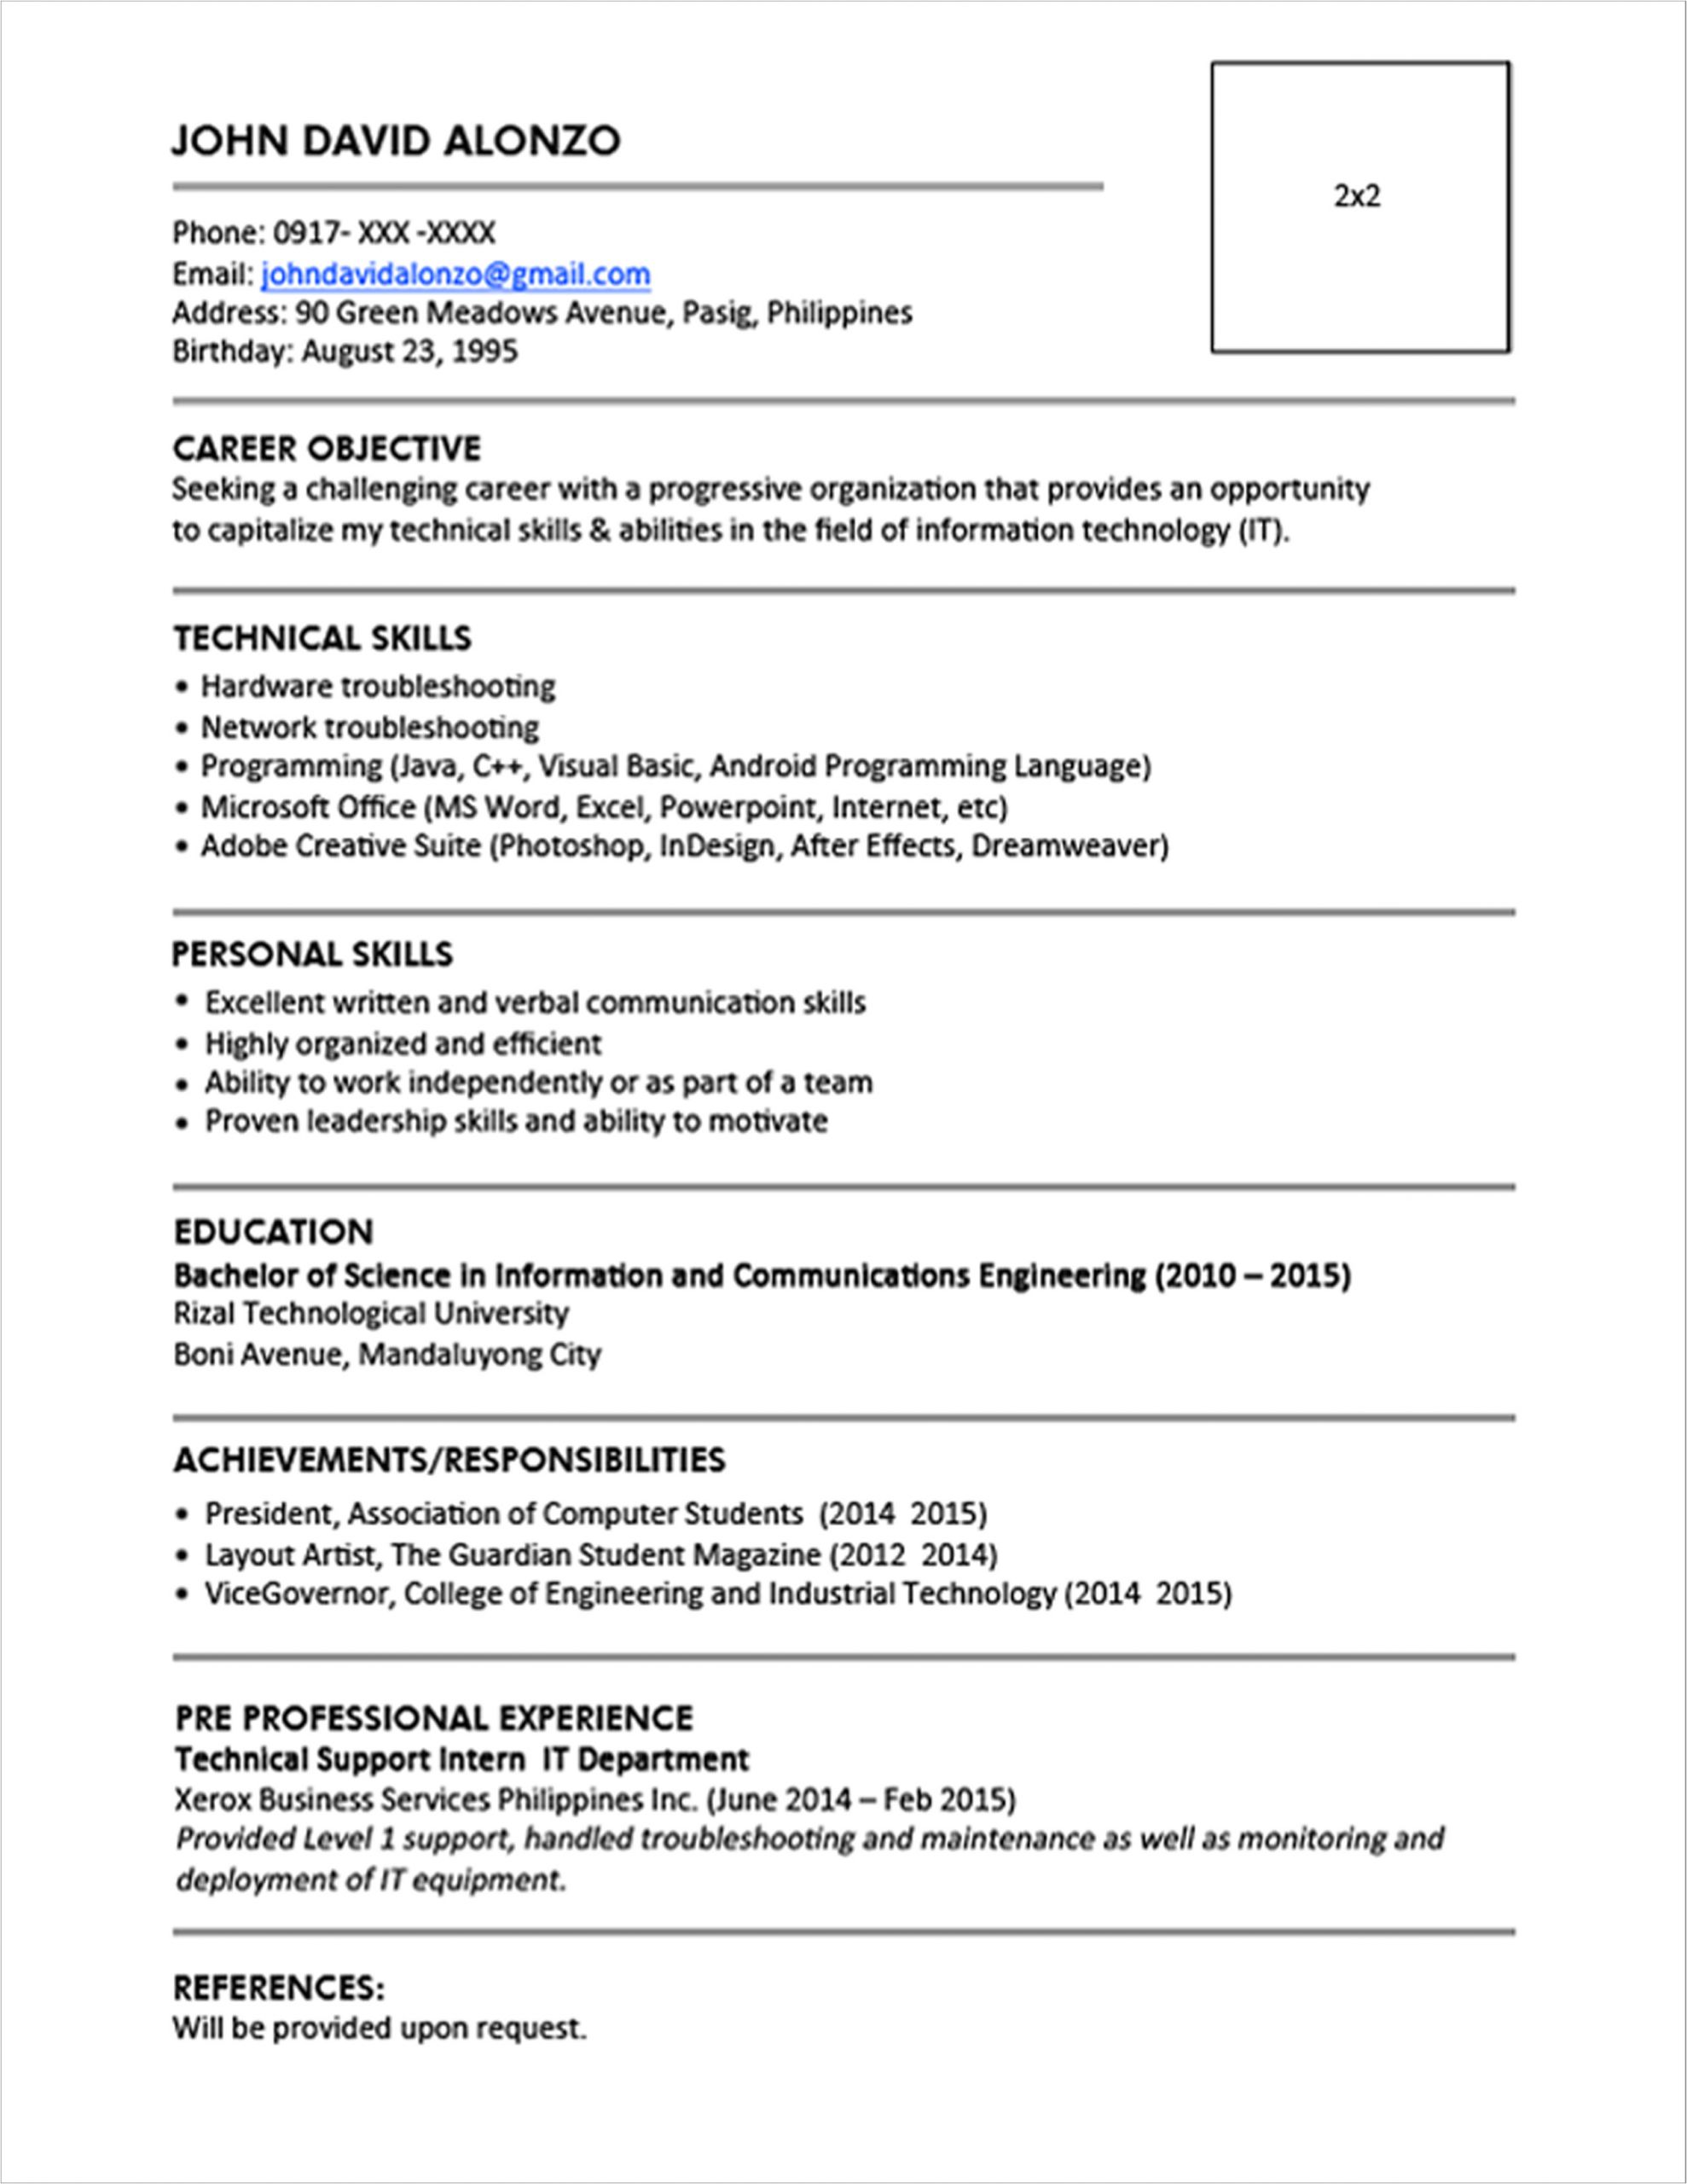 resume templates can download